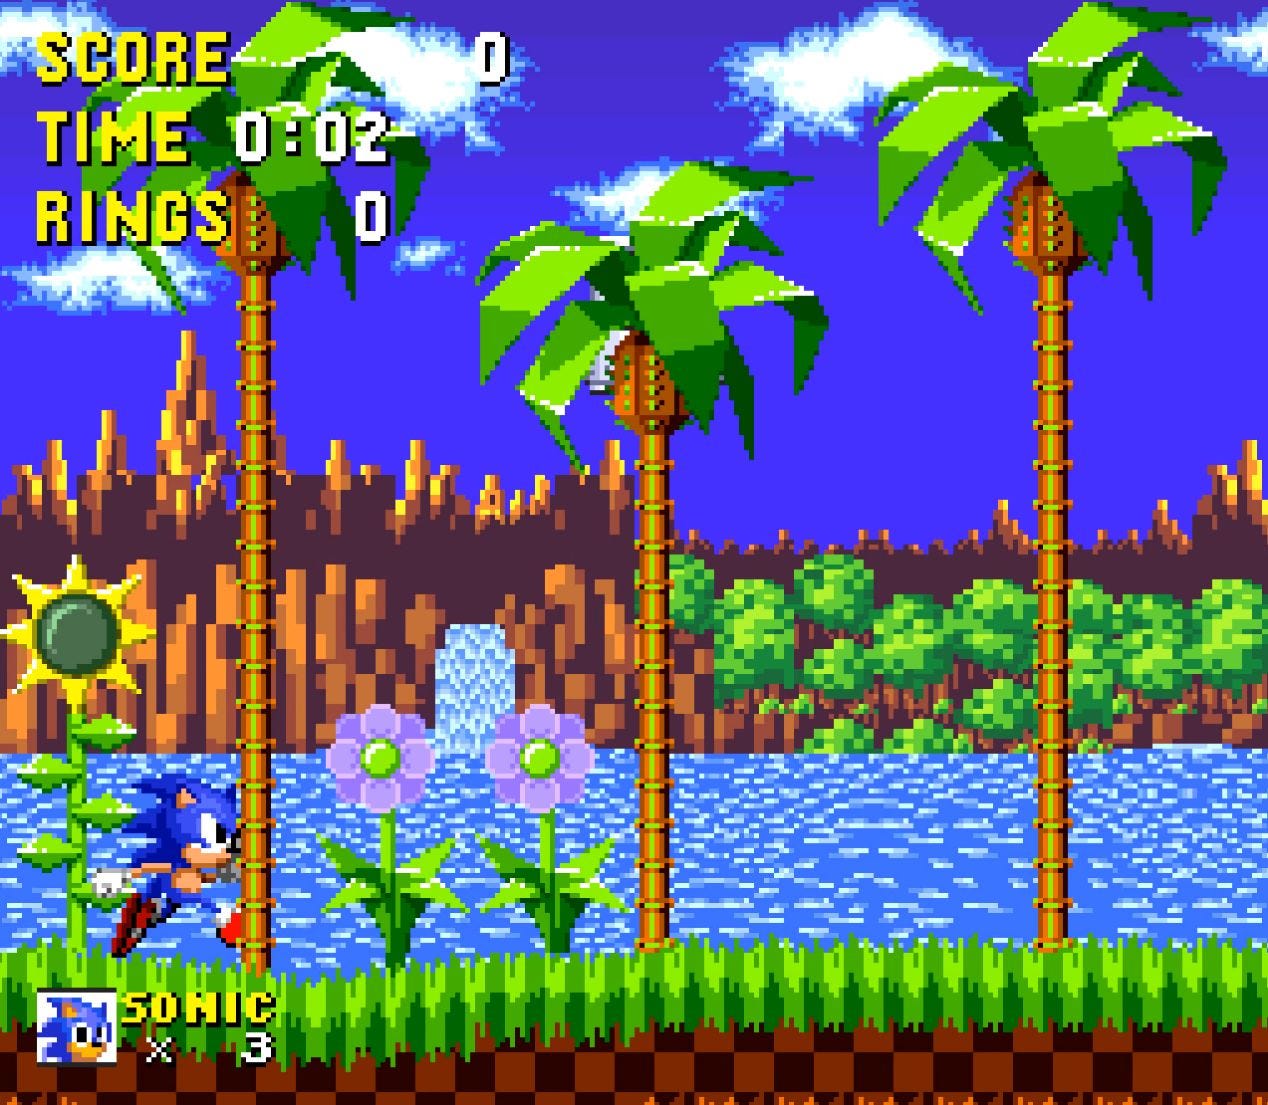 Indie Retro News: Sonic The Hedgehog on the SNES looks seriously cool!